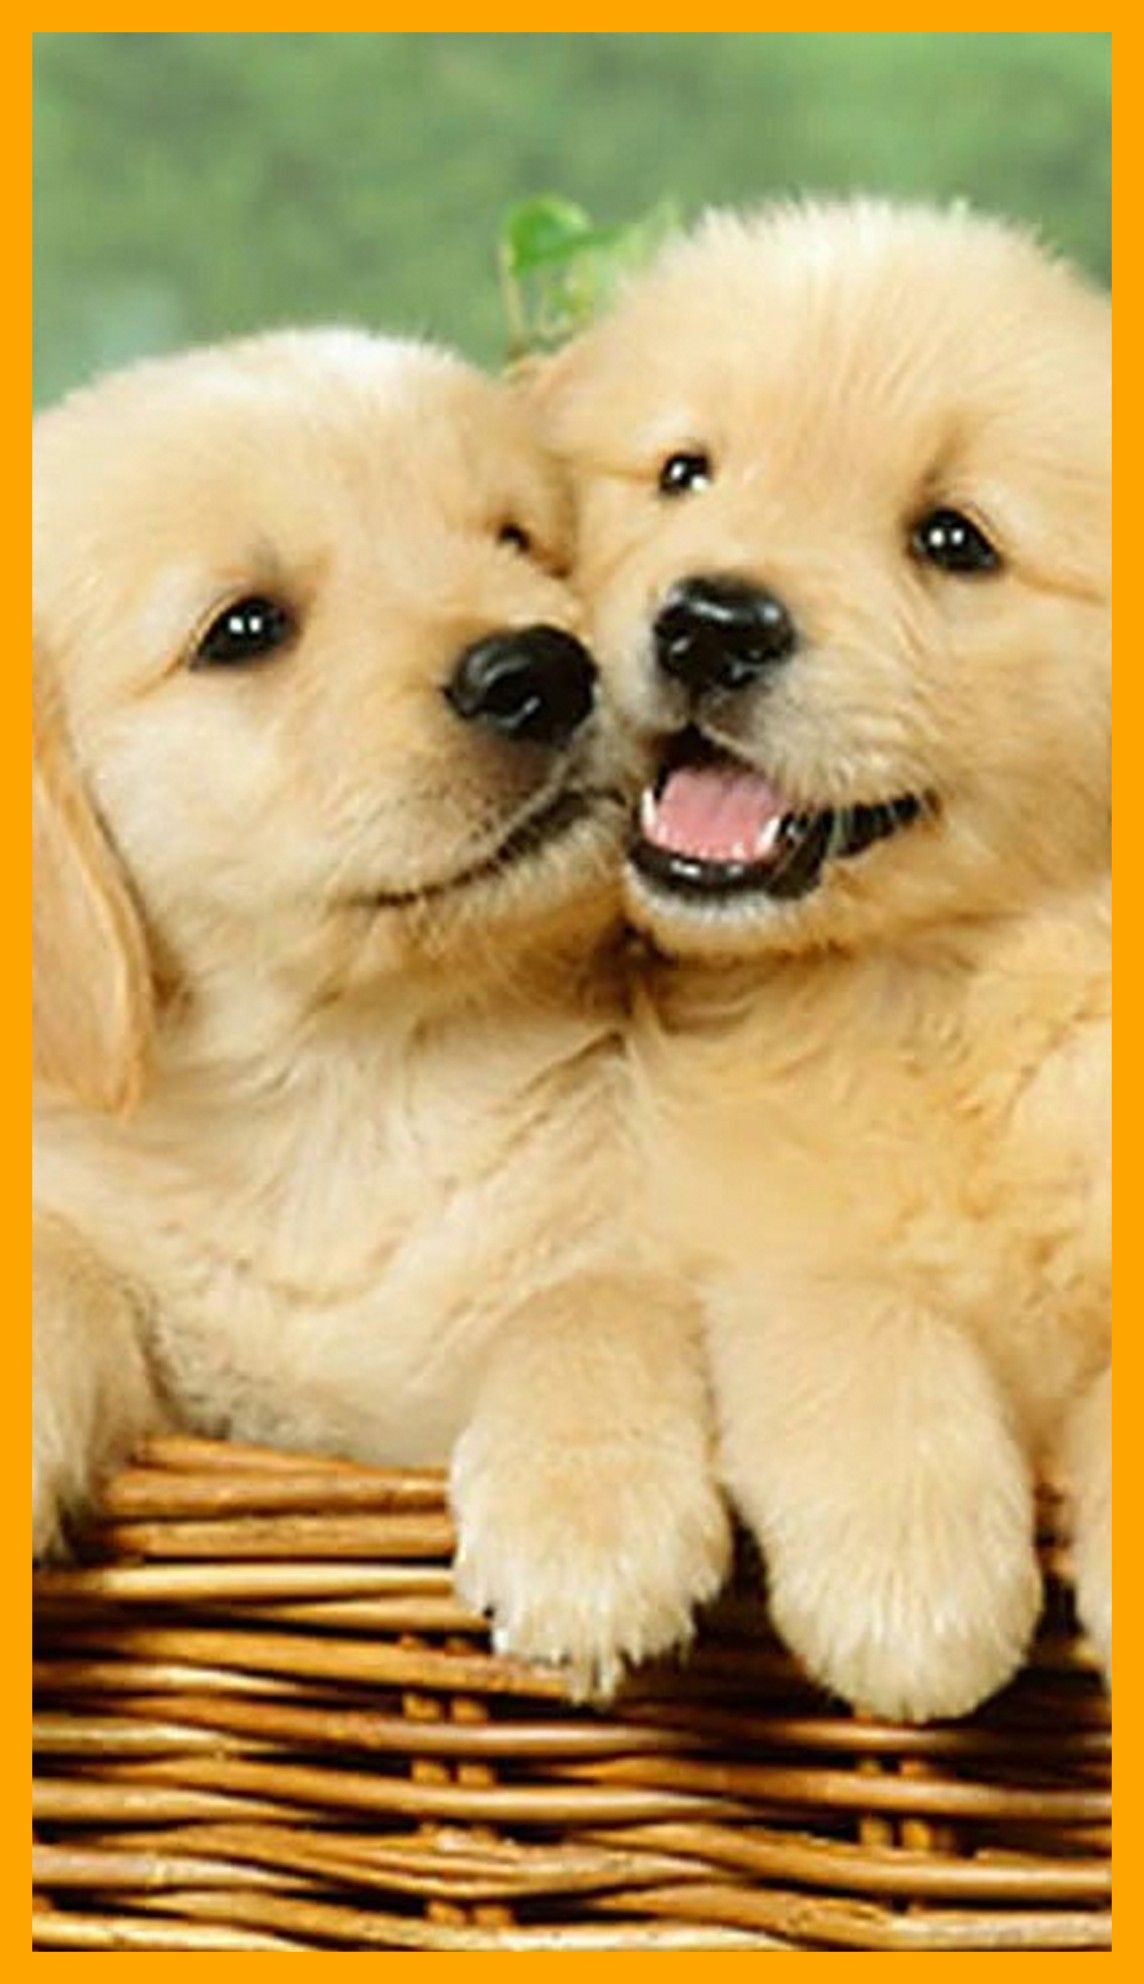 Free download Pin by Fares on Dog wallpaper iphone Puppy wallpaper Dog